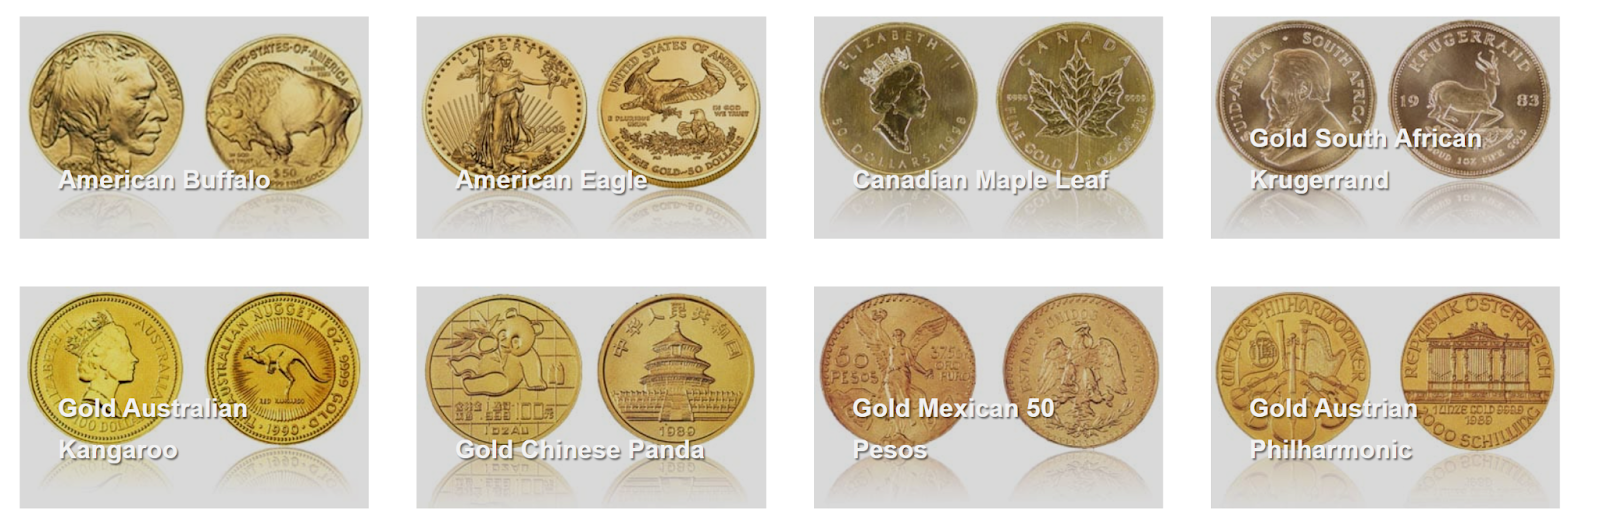 Dallas Gold and Silver Exchange Gold Coins